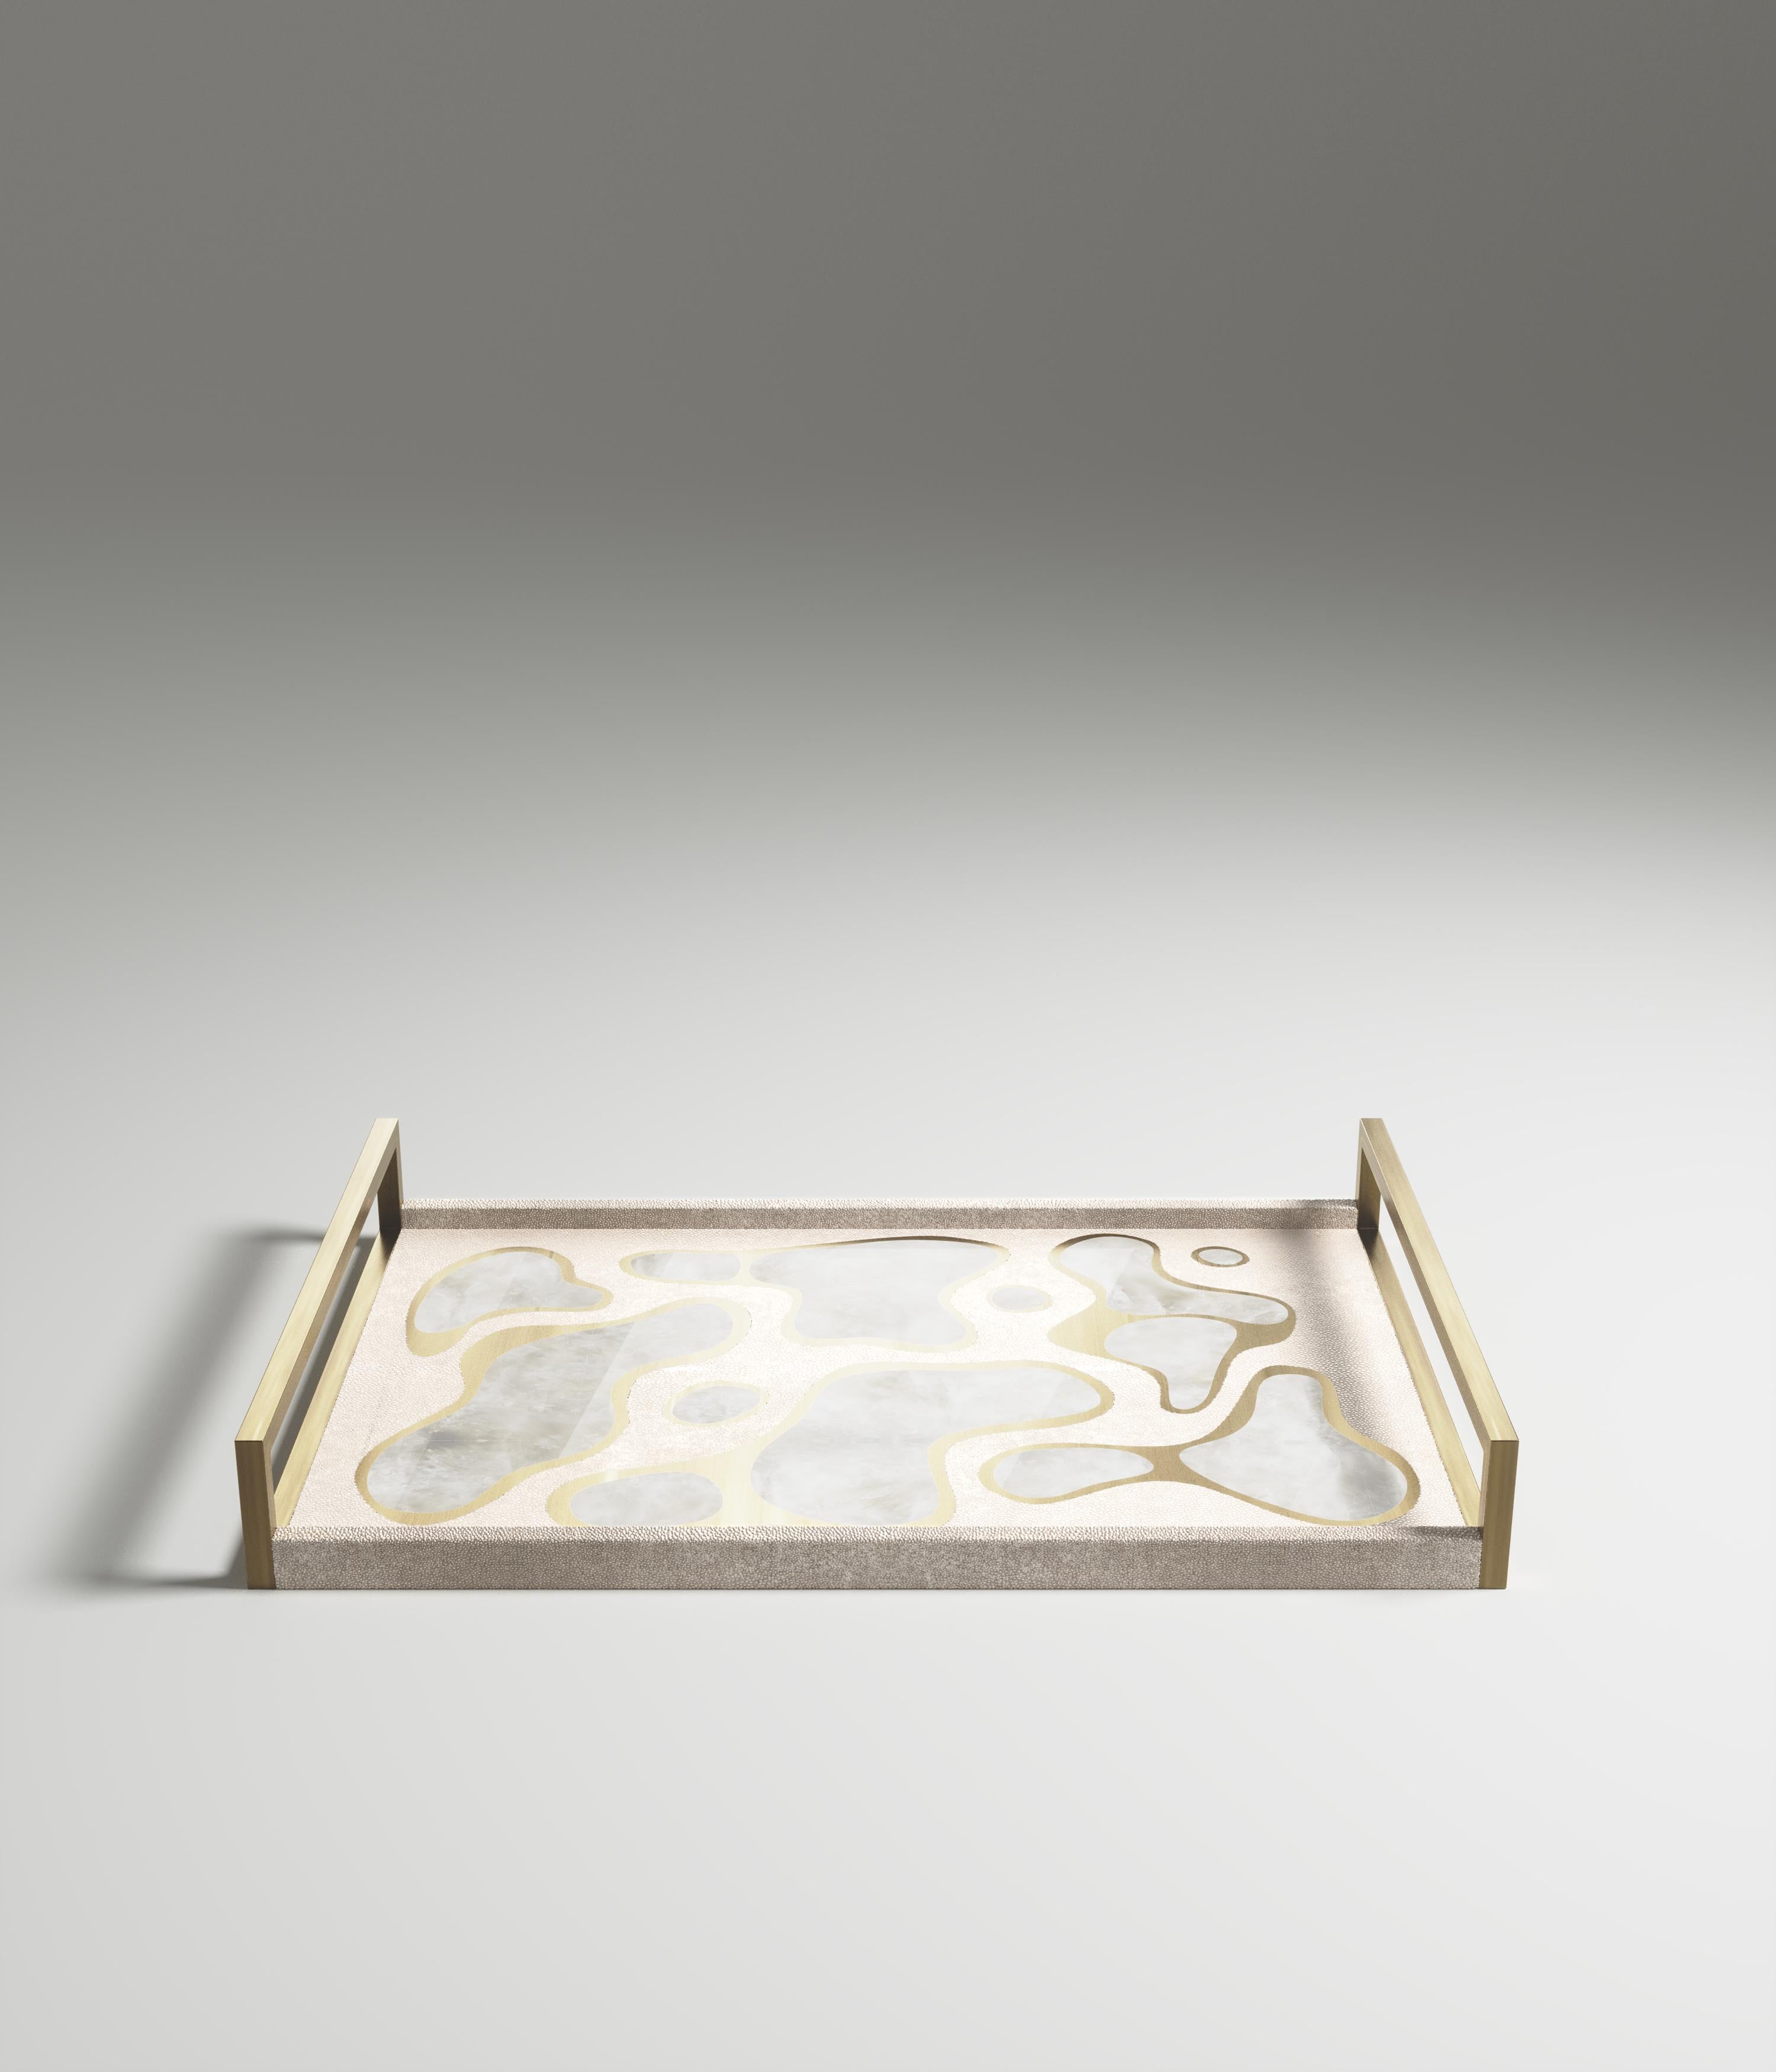 The Mask Rectangular Tray by Kifu Paris is a versatile and organic piece. The amorphous top is inlaid in a mixture of cream shagreen, white quartz and bronze-patina brass. This piece is designed by Kifu Augousti the daughter of Ria and Yiouri